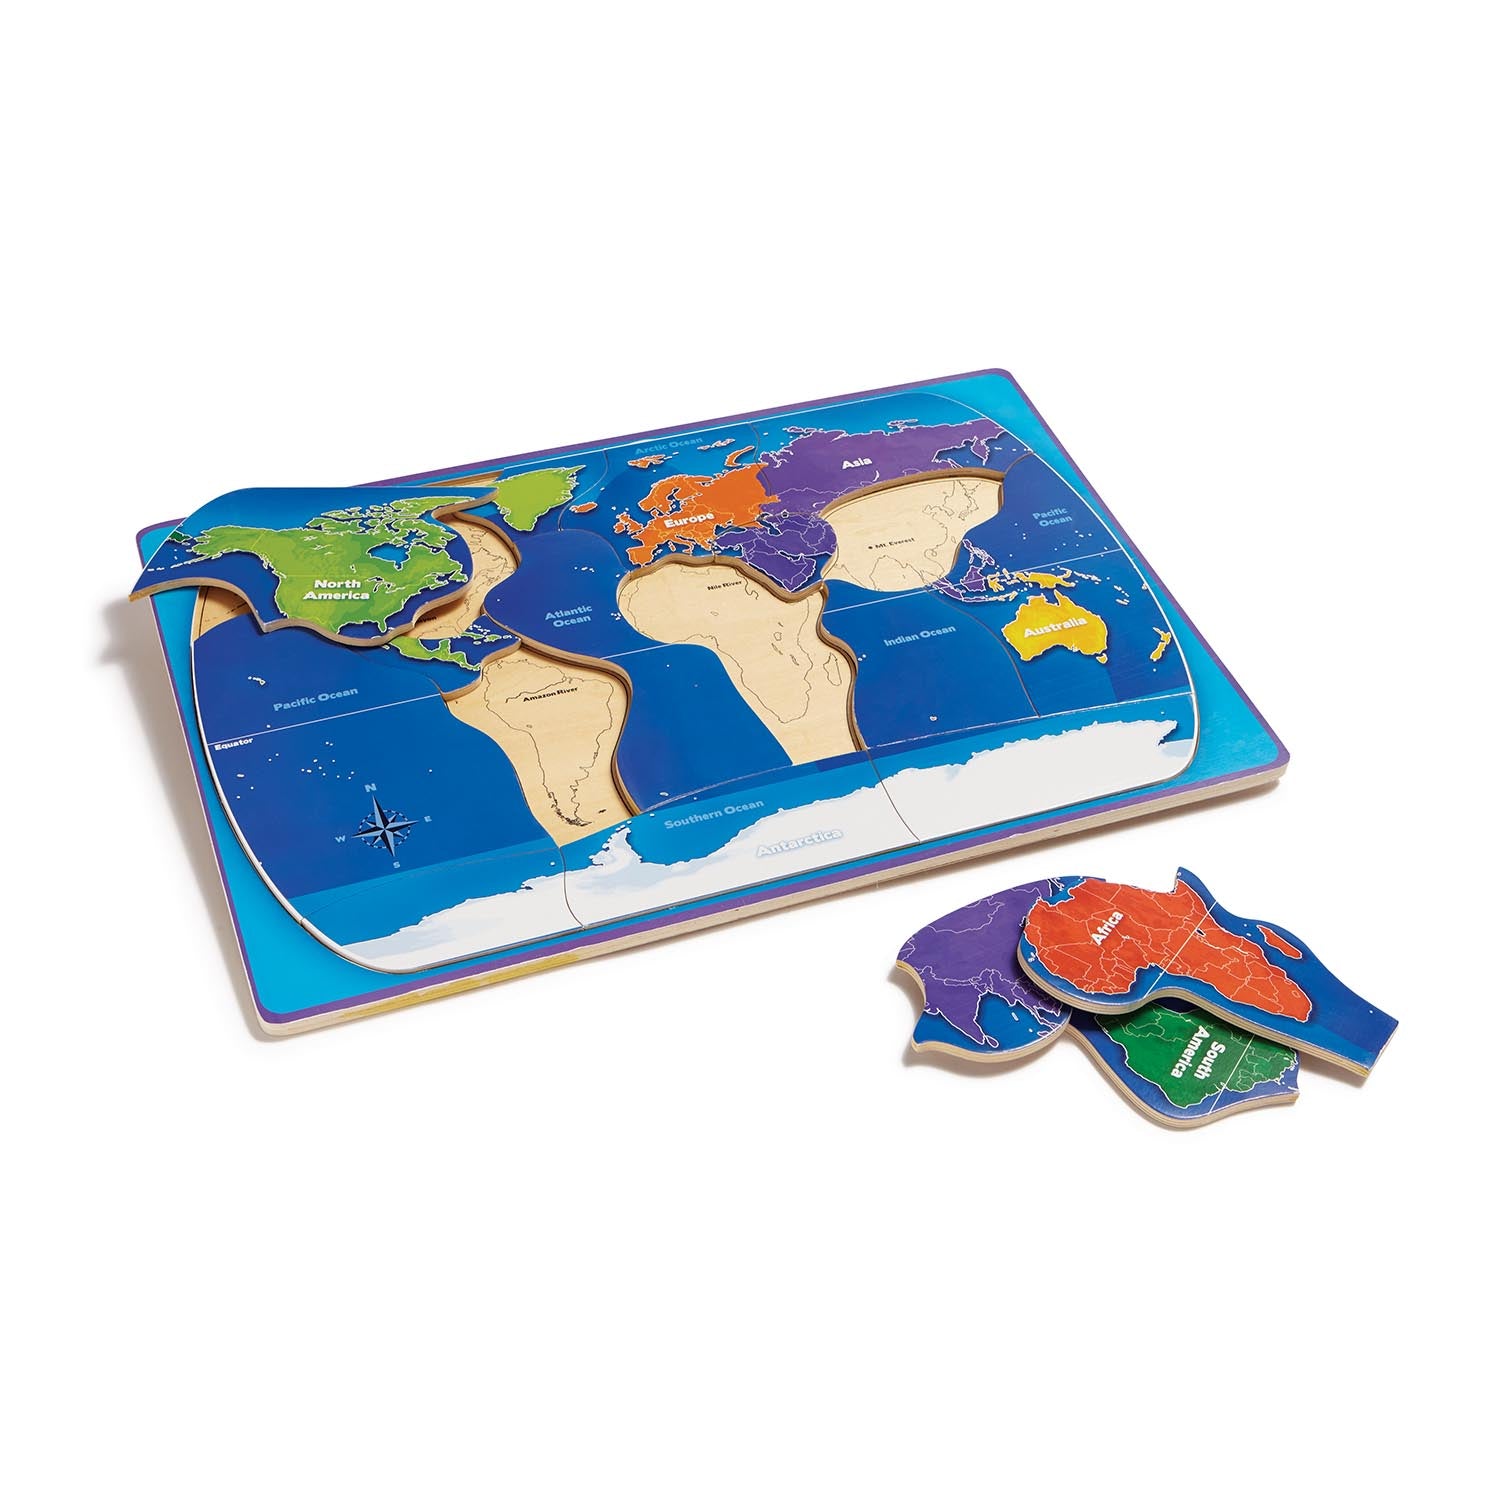 Our World Puzzle Set: Wooden Puzzles for ages 3 and up